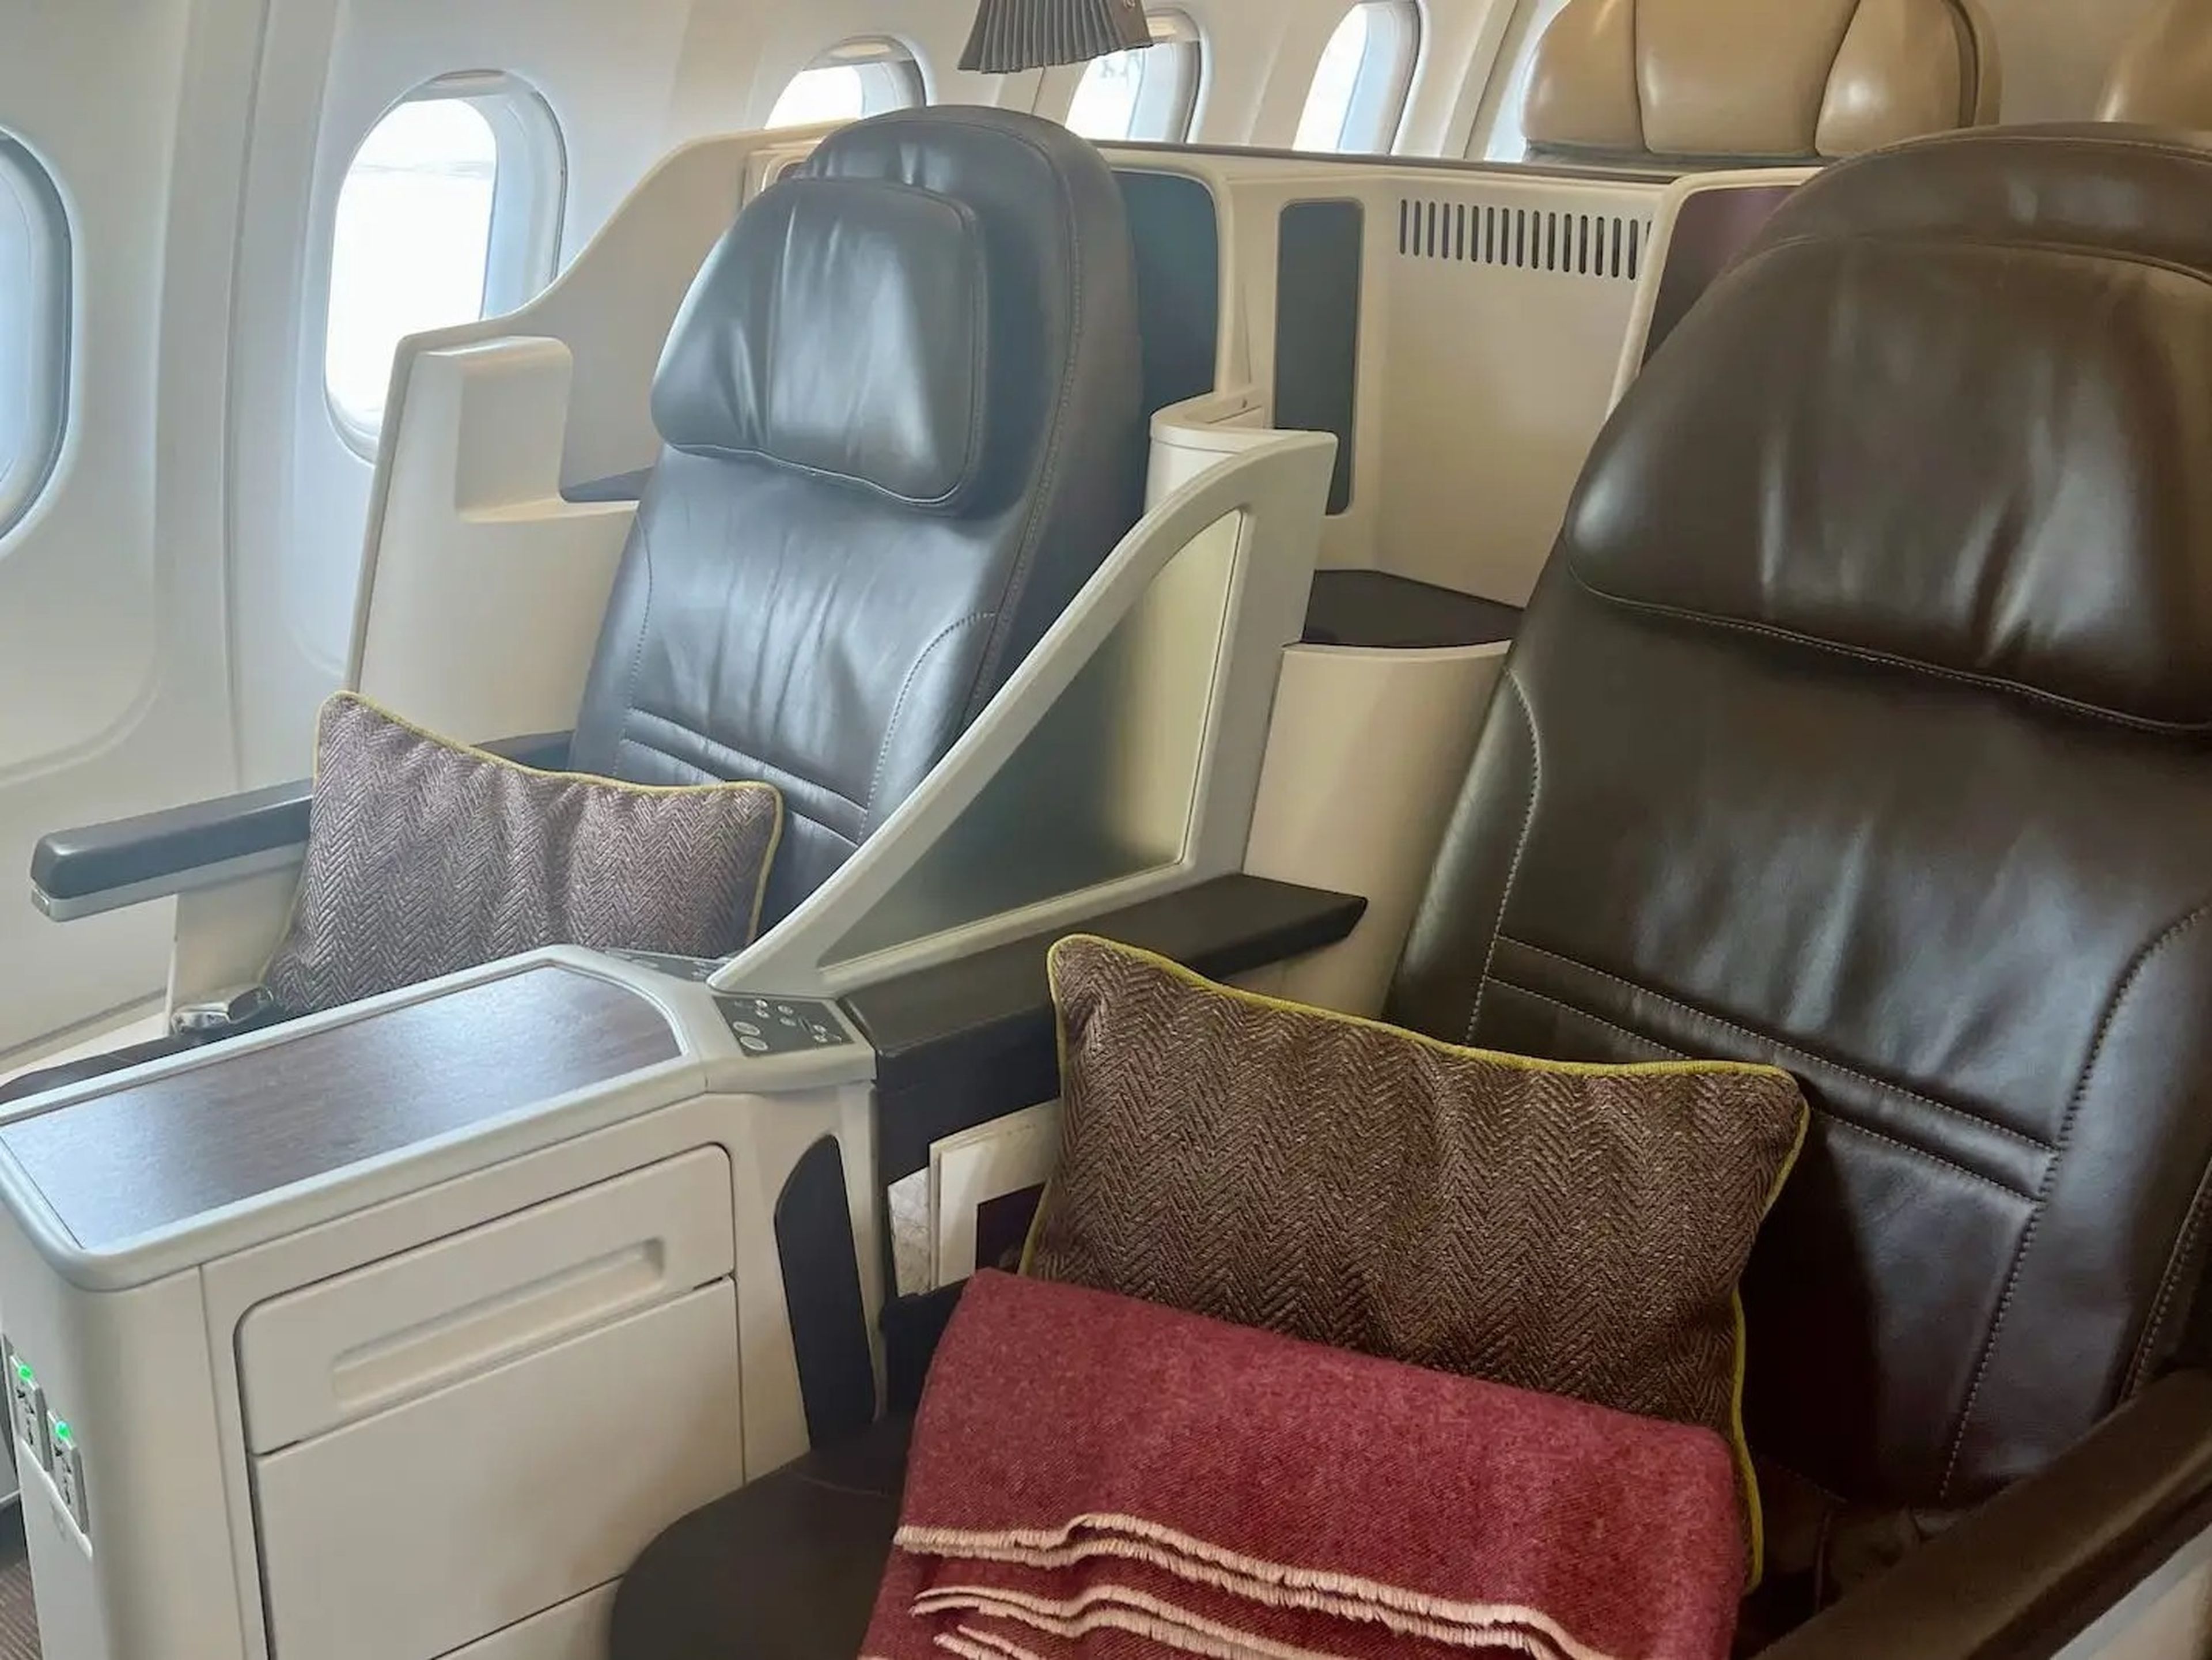 The brown lie-flat seats in 2x2 layout with pillows and blankets.